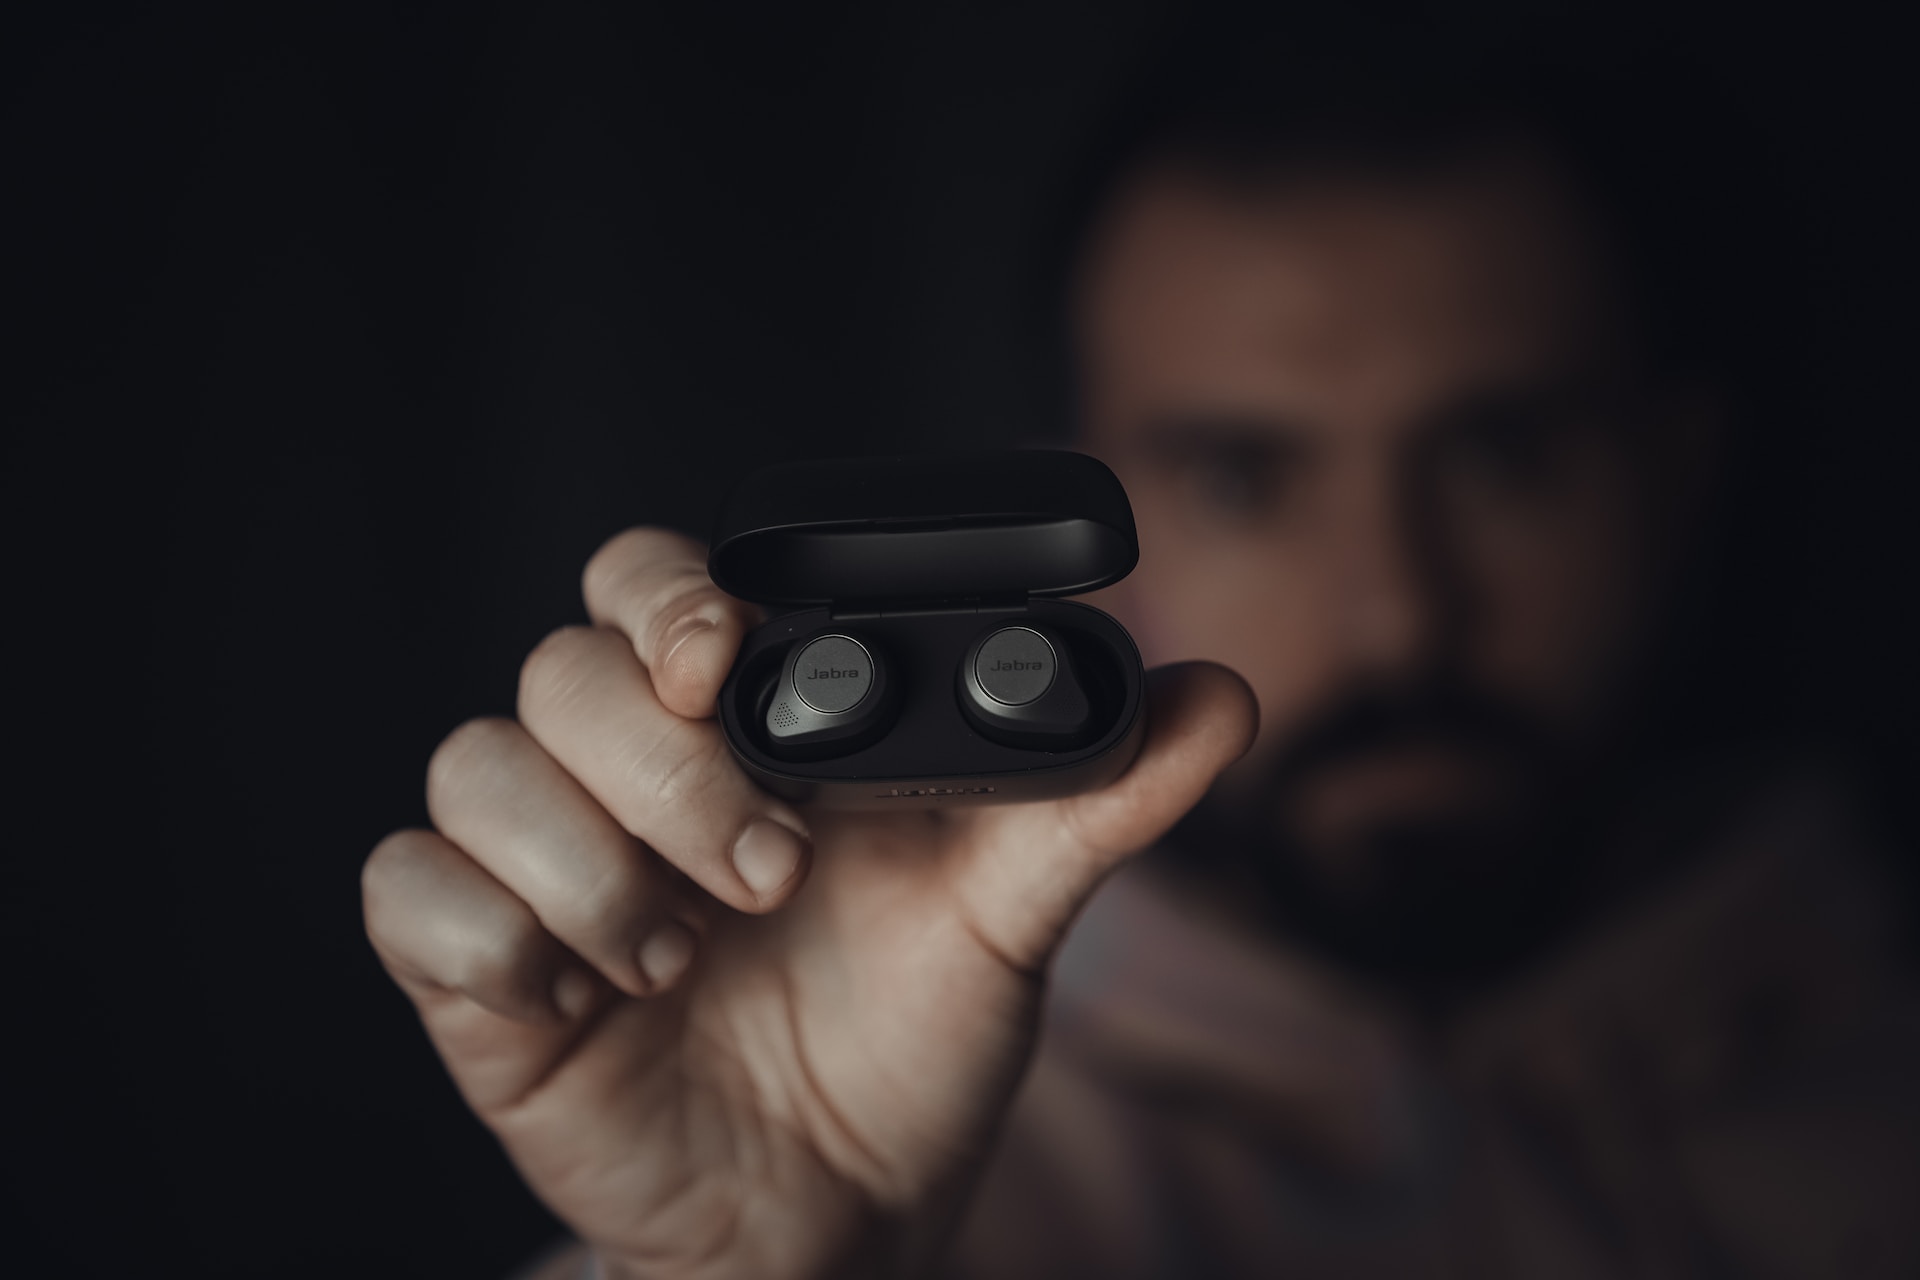 Jabra Elite 85t True Wireless Earbuds with Active Noise Cancellation